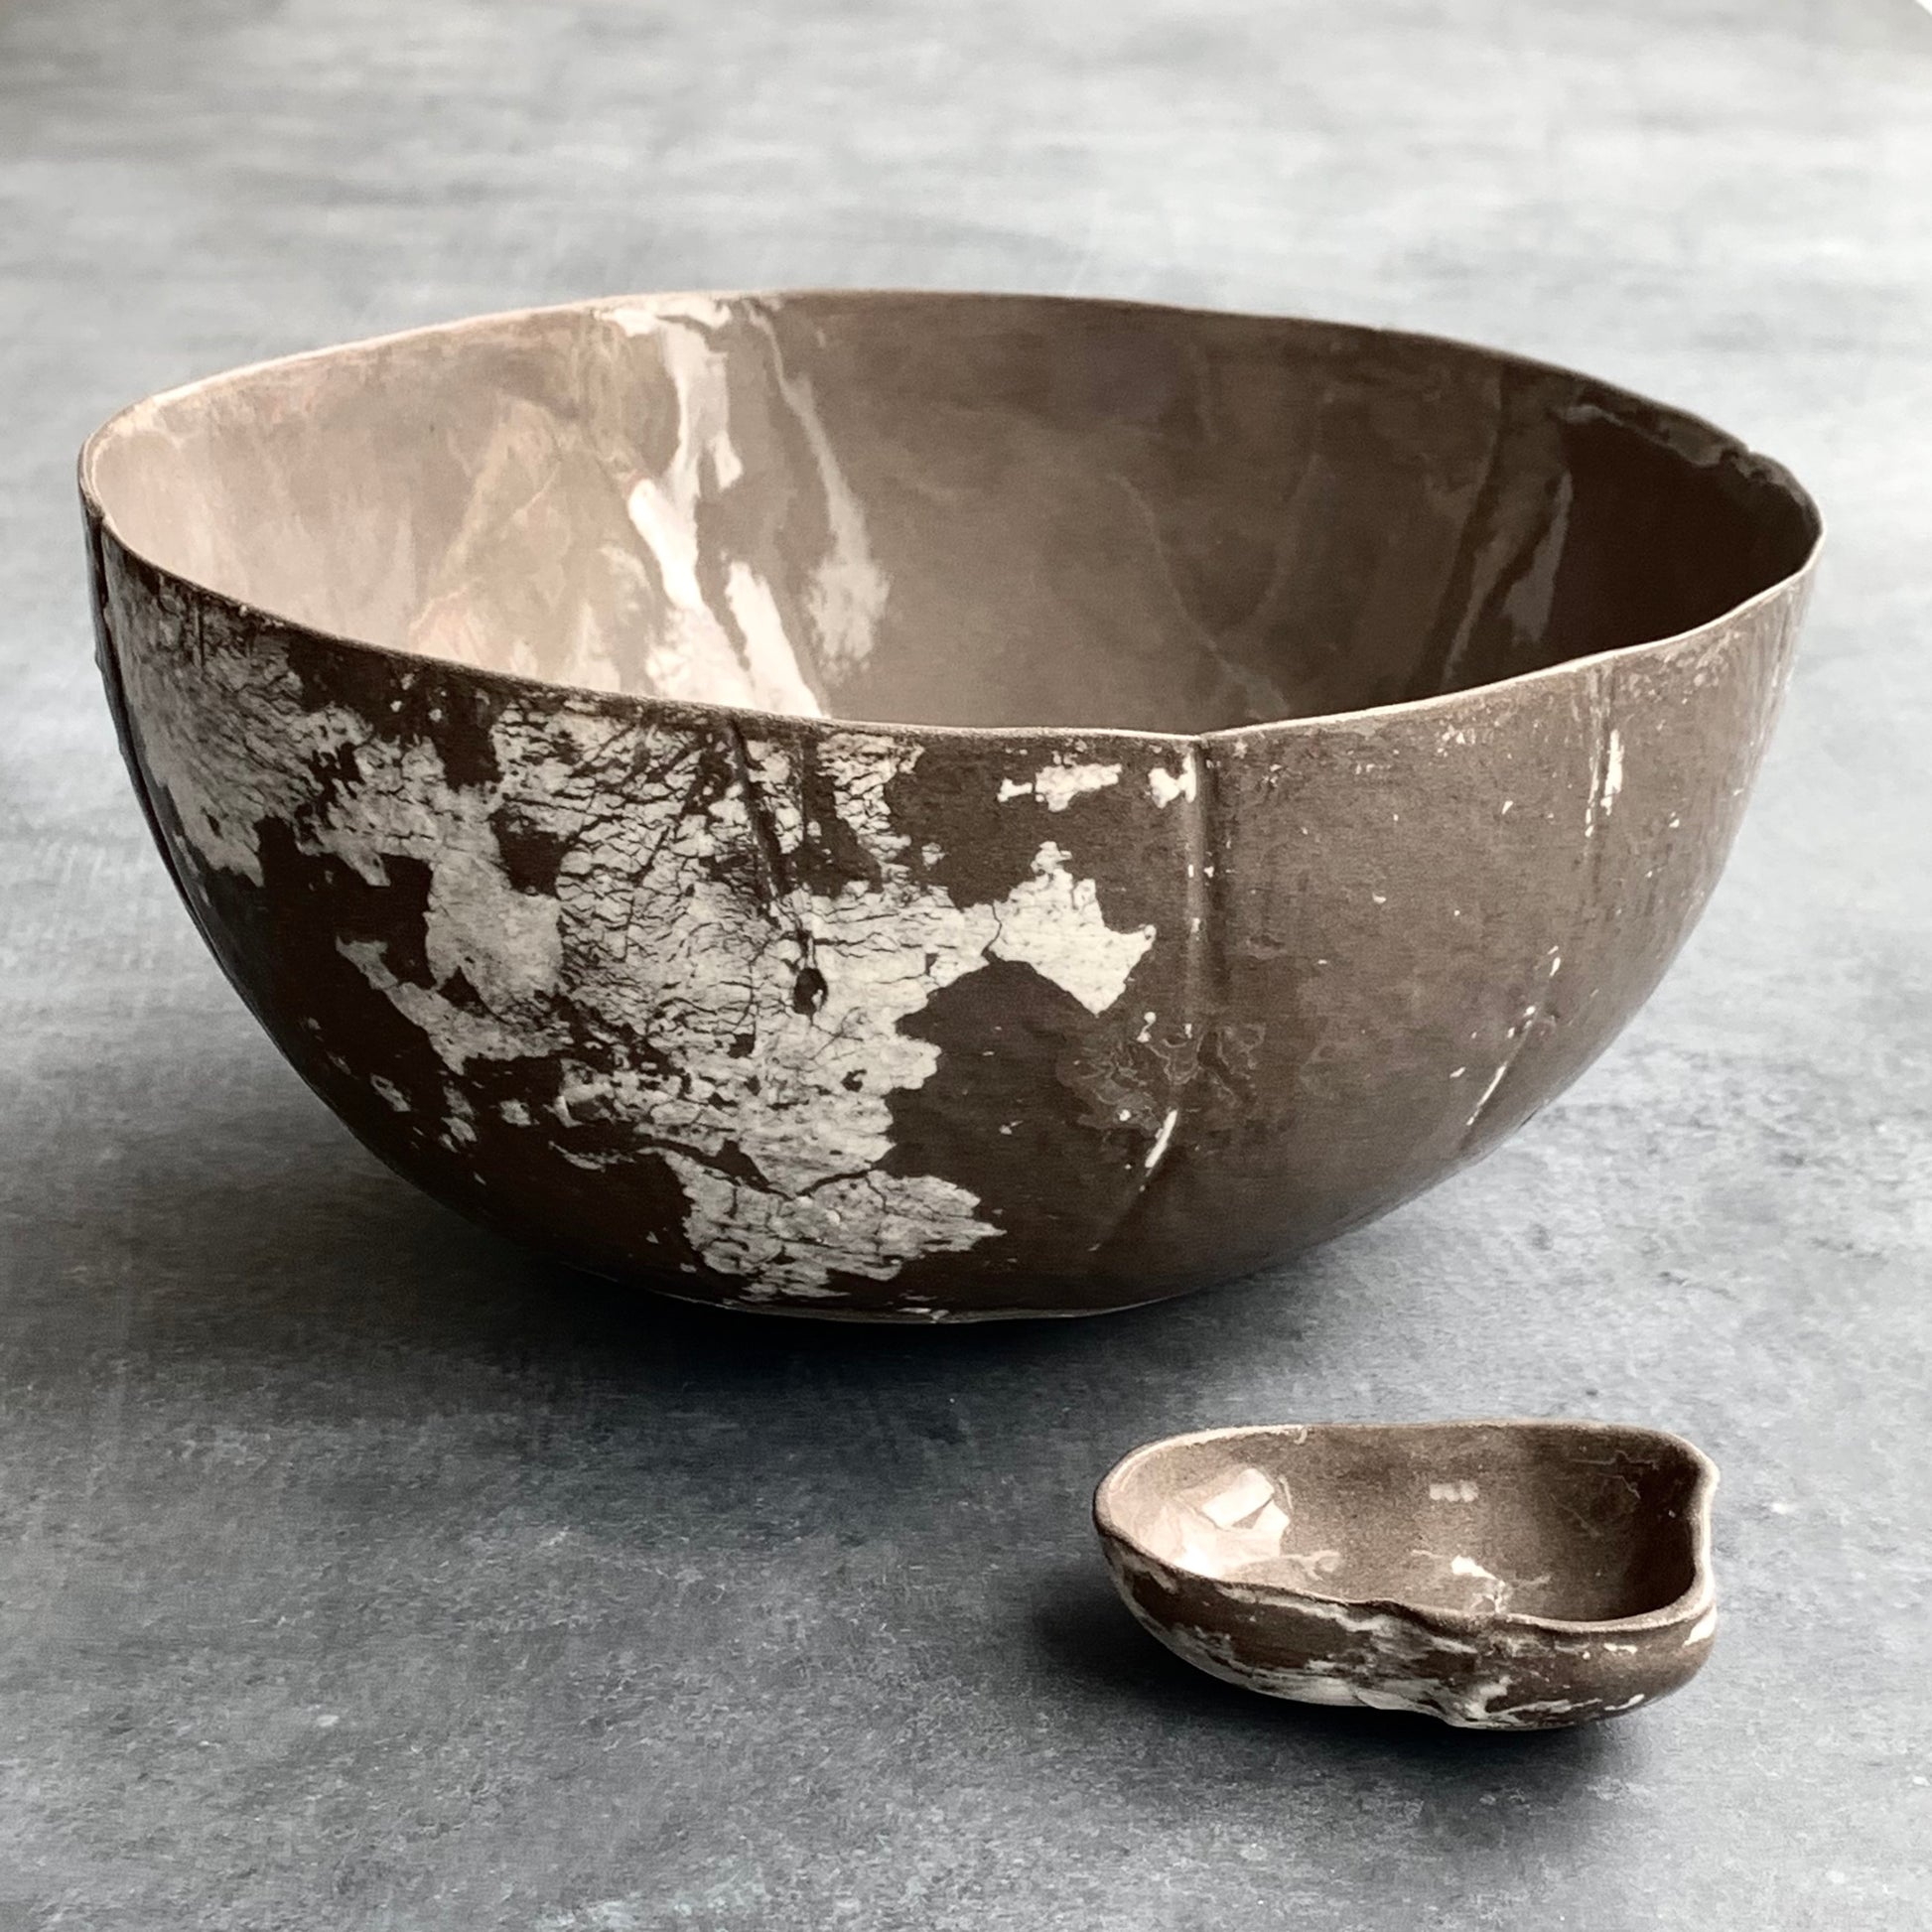 Unique handmade grey-brown ceramic bowl from the Amazon collection. This extra large bowl made of grey-brown clay enriches your table setting with a rich earthy feel or will surprise someone as a personal ceramic gift. A one of a kind signature piece of tableware with a unique design and white porcelain slib